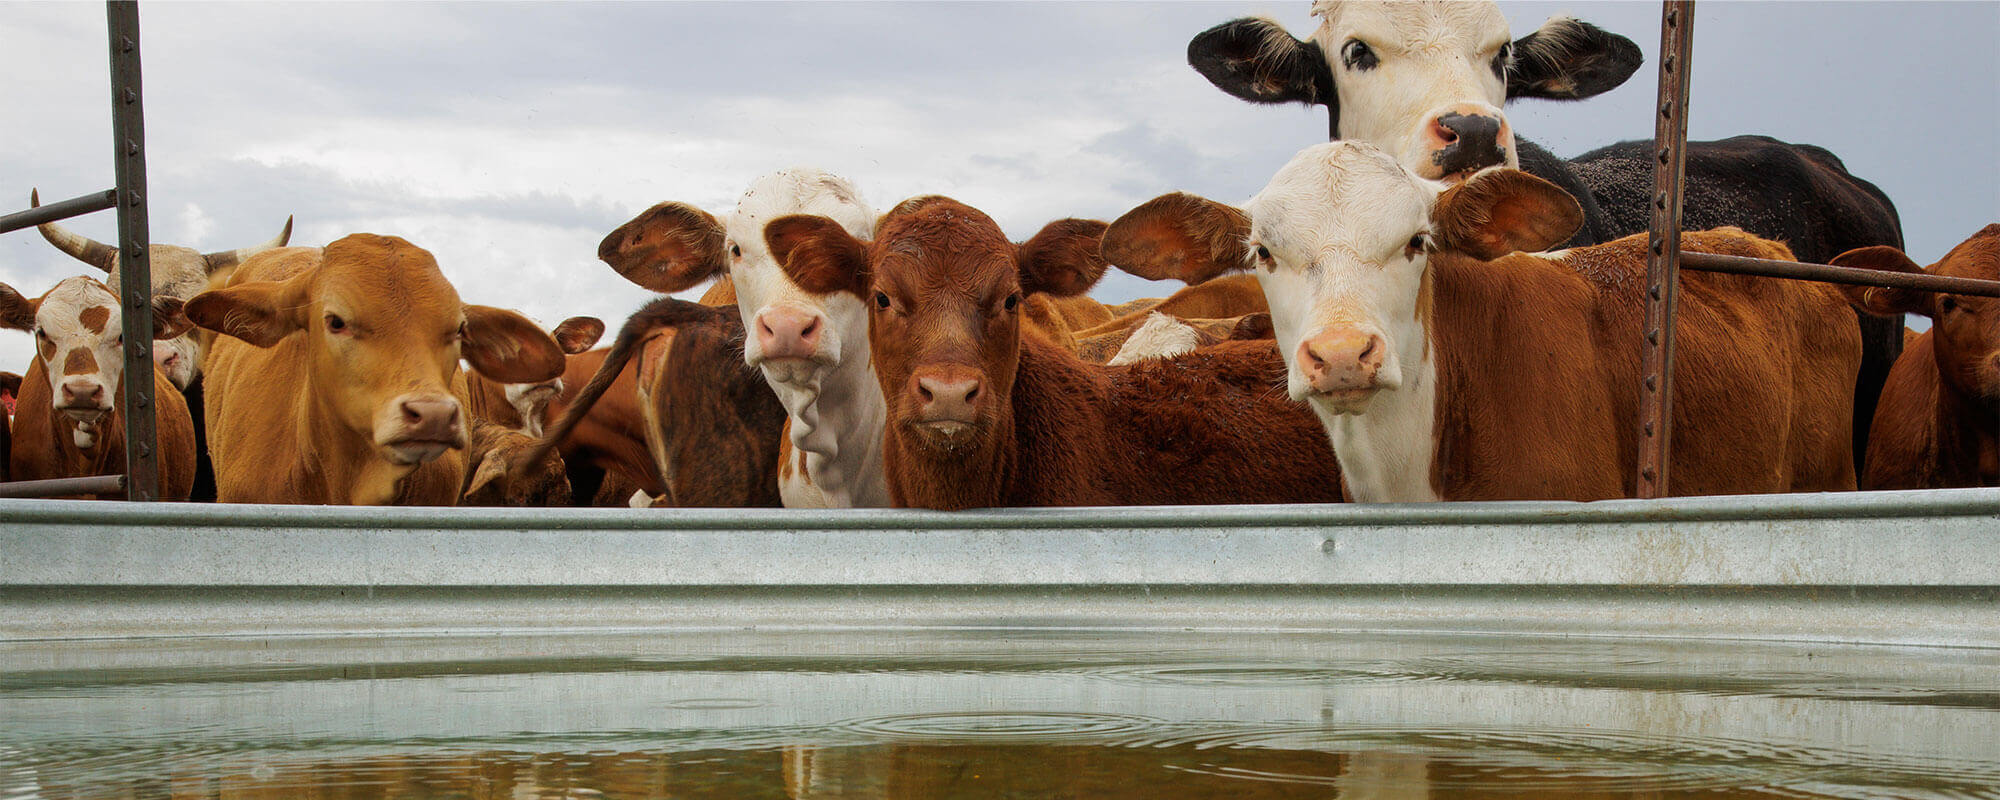 Cattle at Water Trough